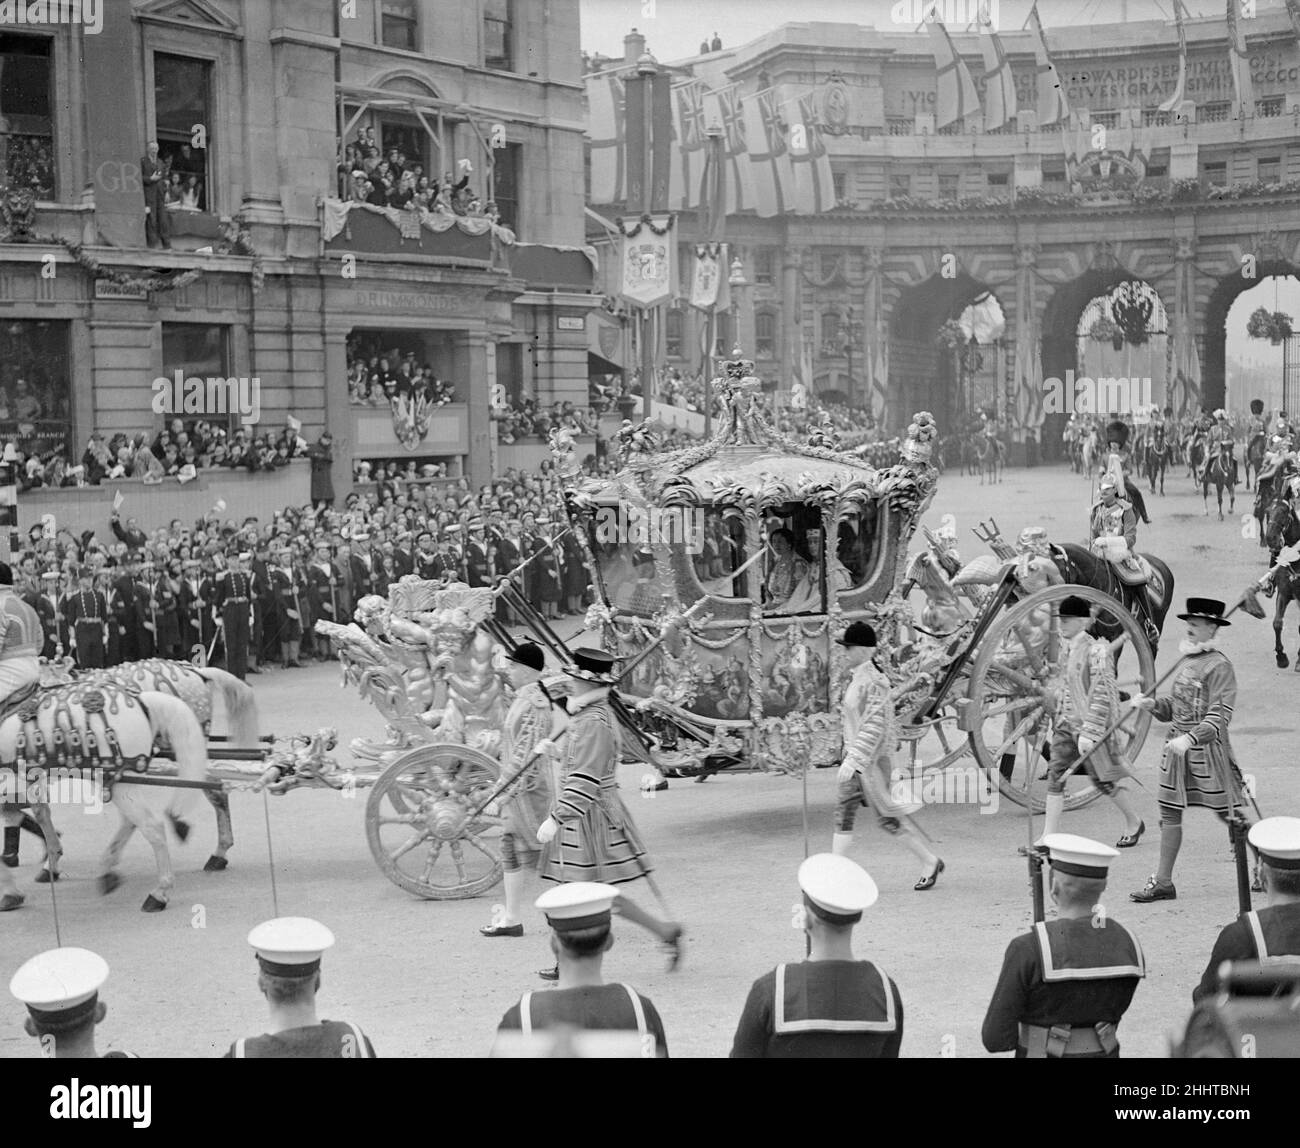 Coronation of King George VI. The golden state coach containing King George VI passes through Amiralty Arch on The Mall as thousands of people cheer from the side of the road. 12th May 1937. Stock Photo